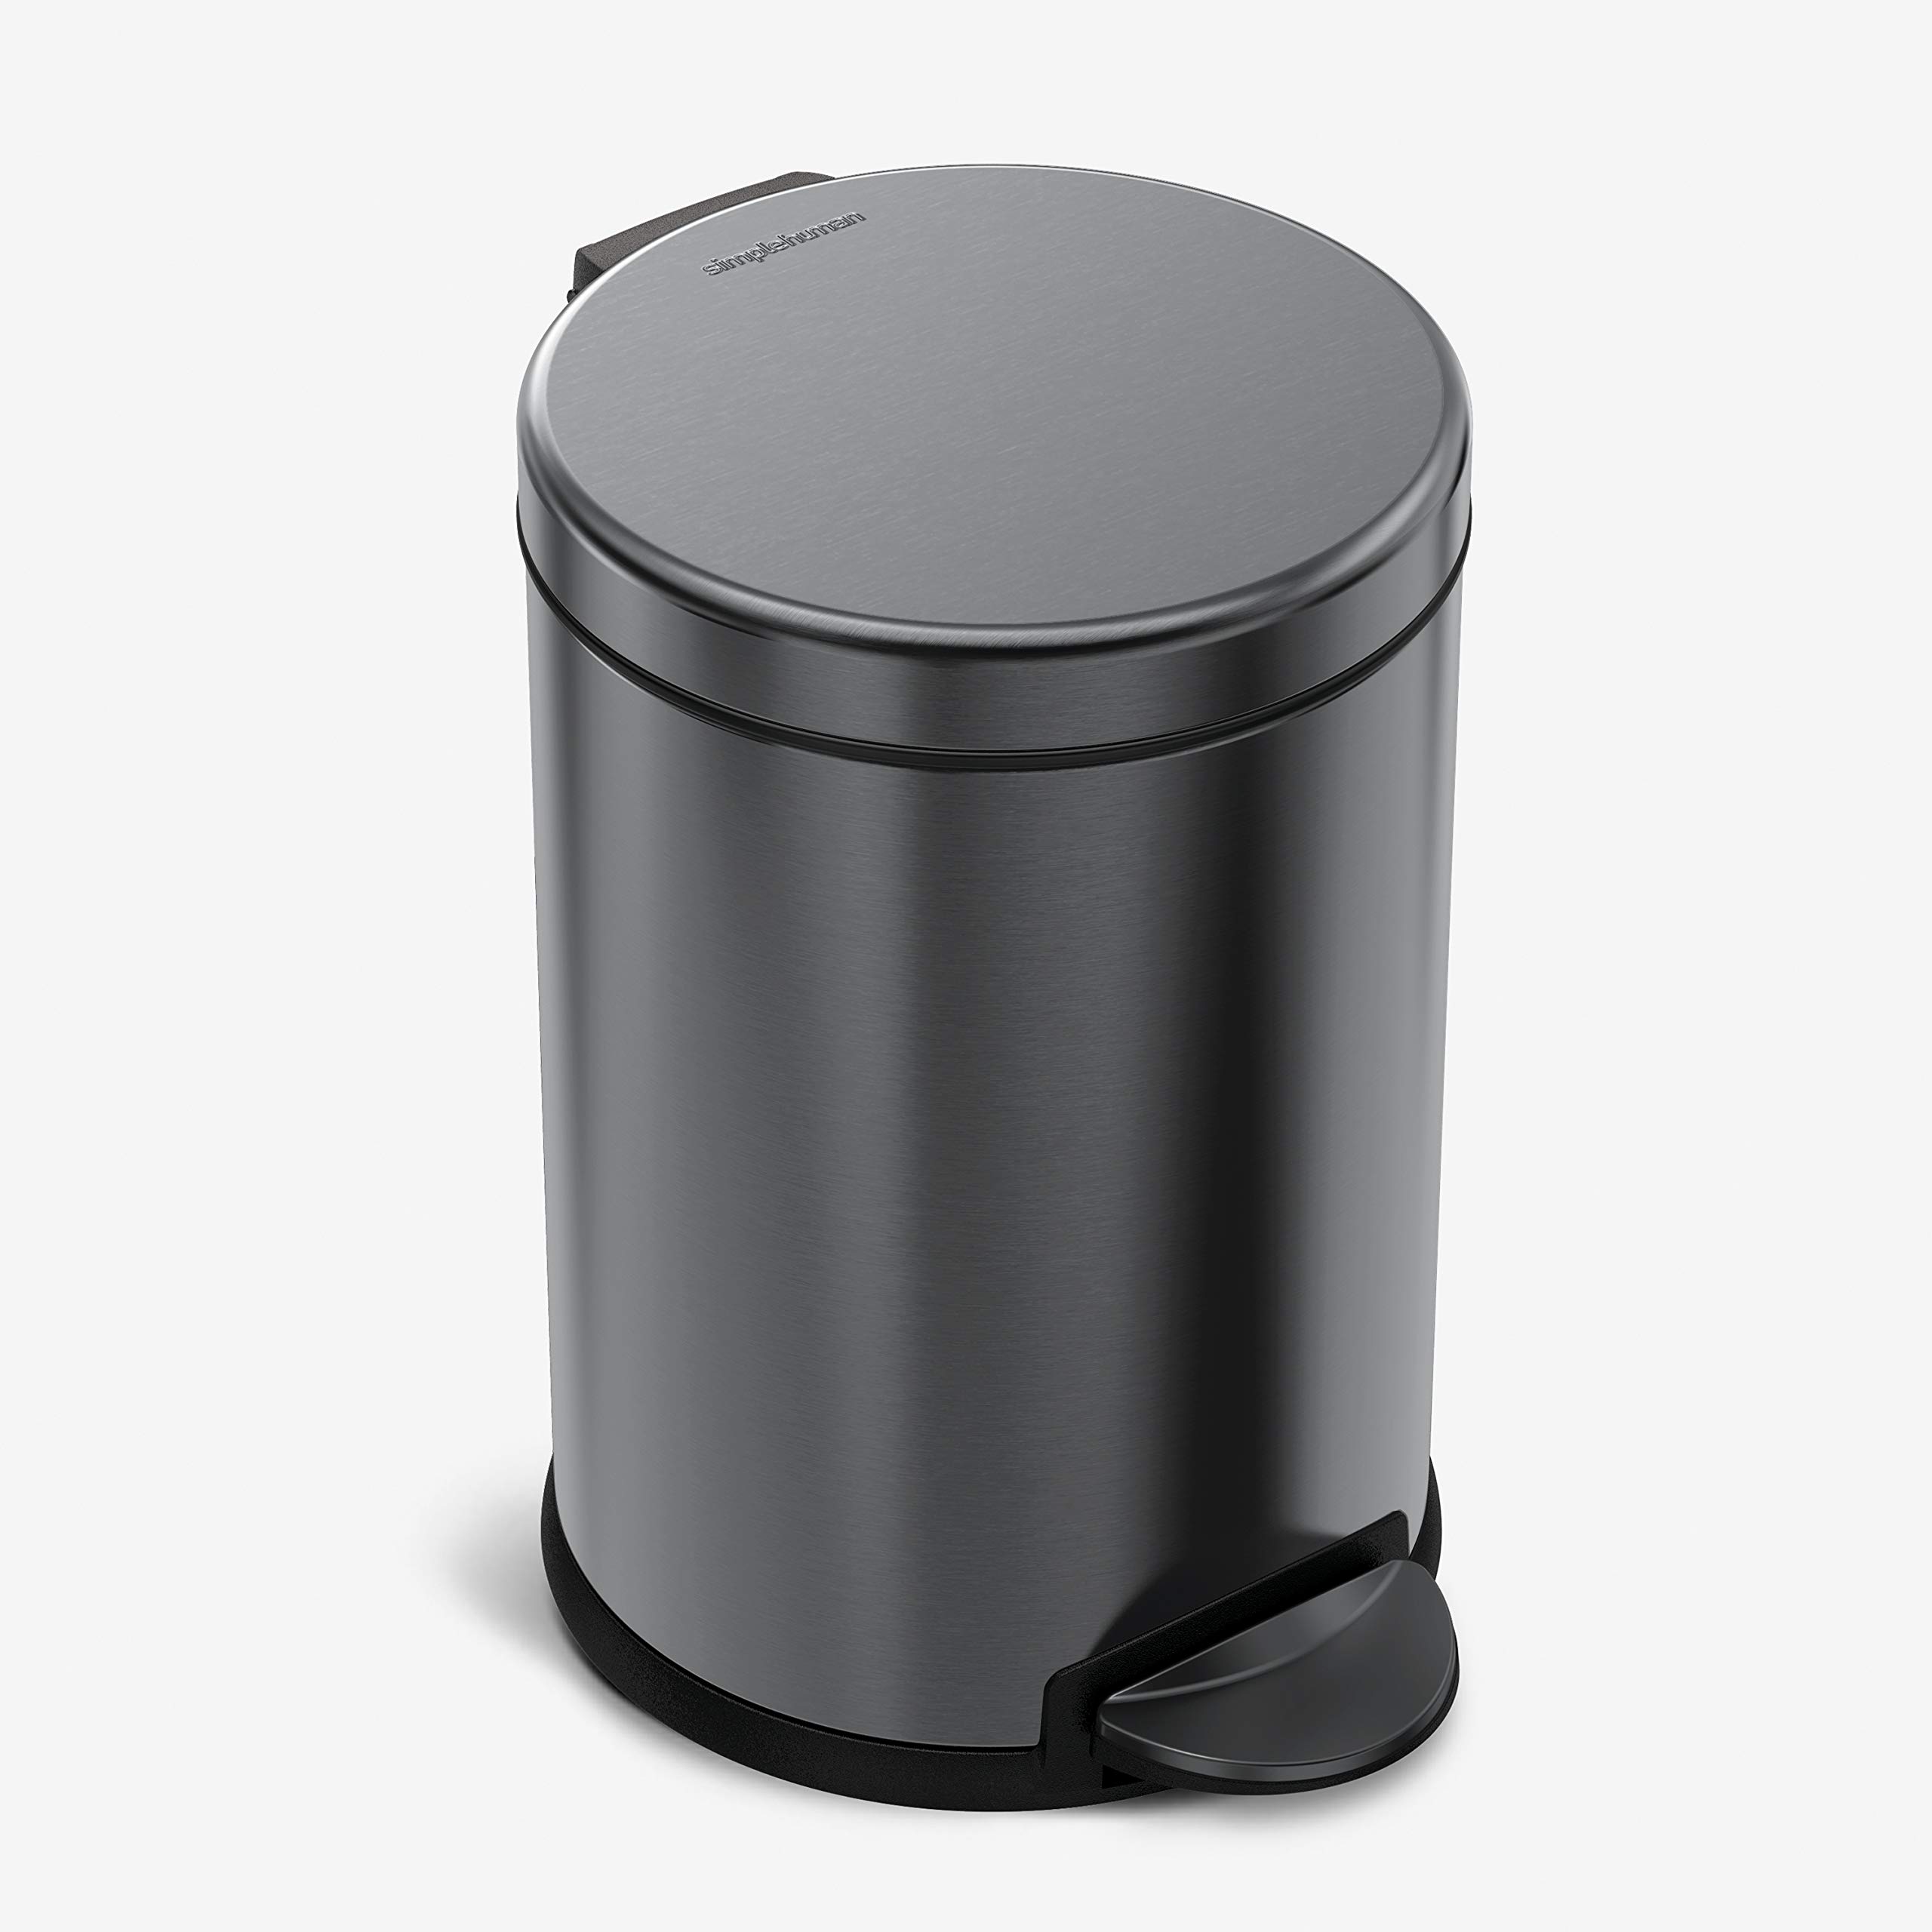 Book Cover simplehuman 4.5 Liter / 1.2 Gallon Round Bathroom Step Trash Can, Black Stainless Steel